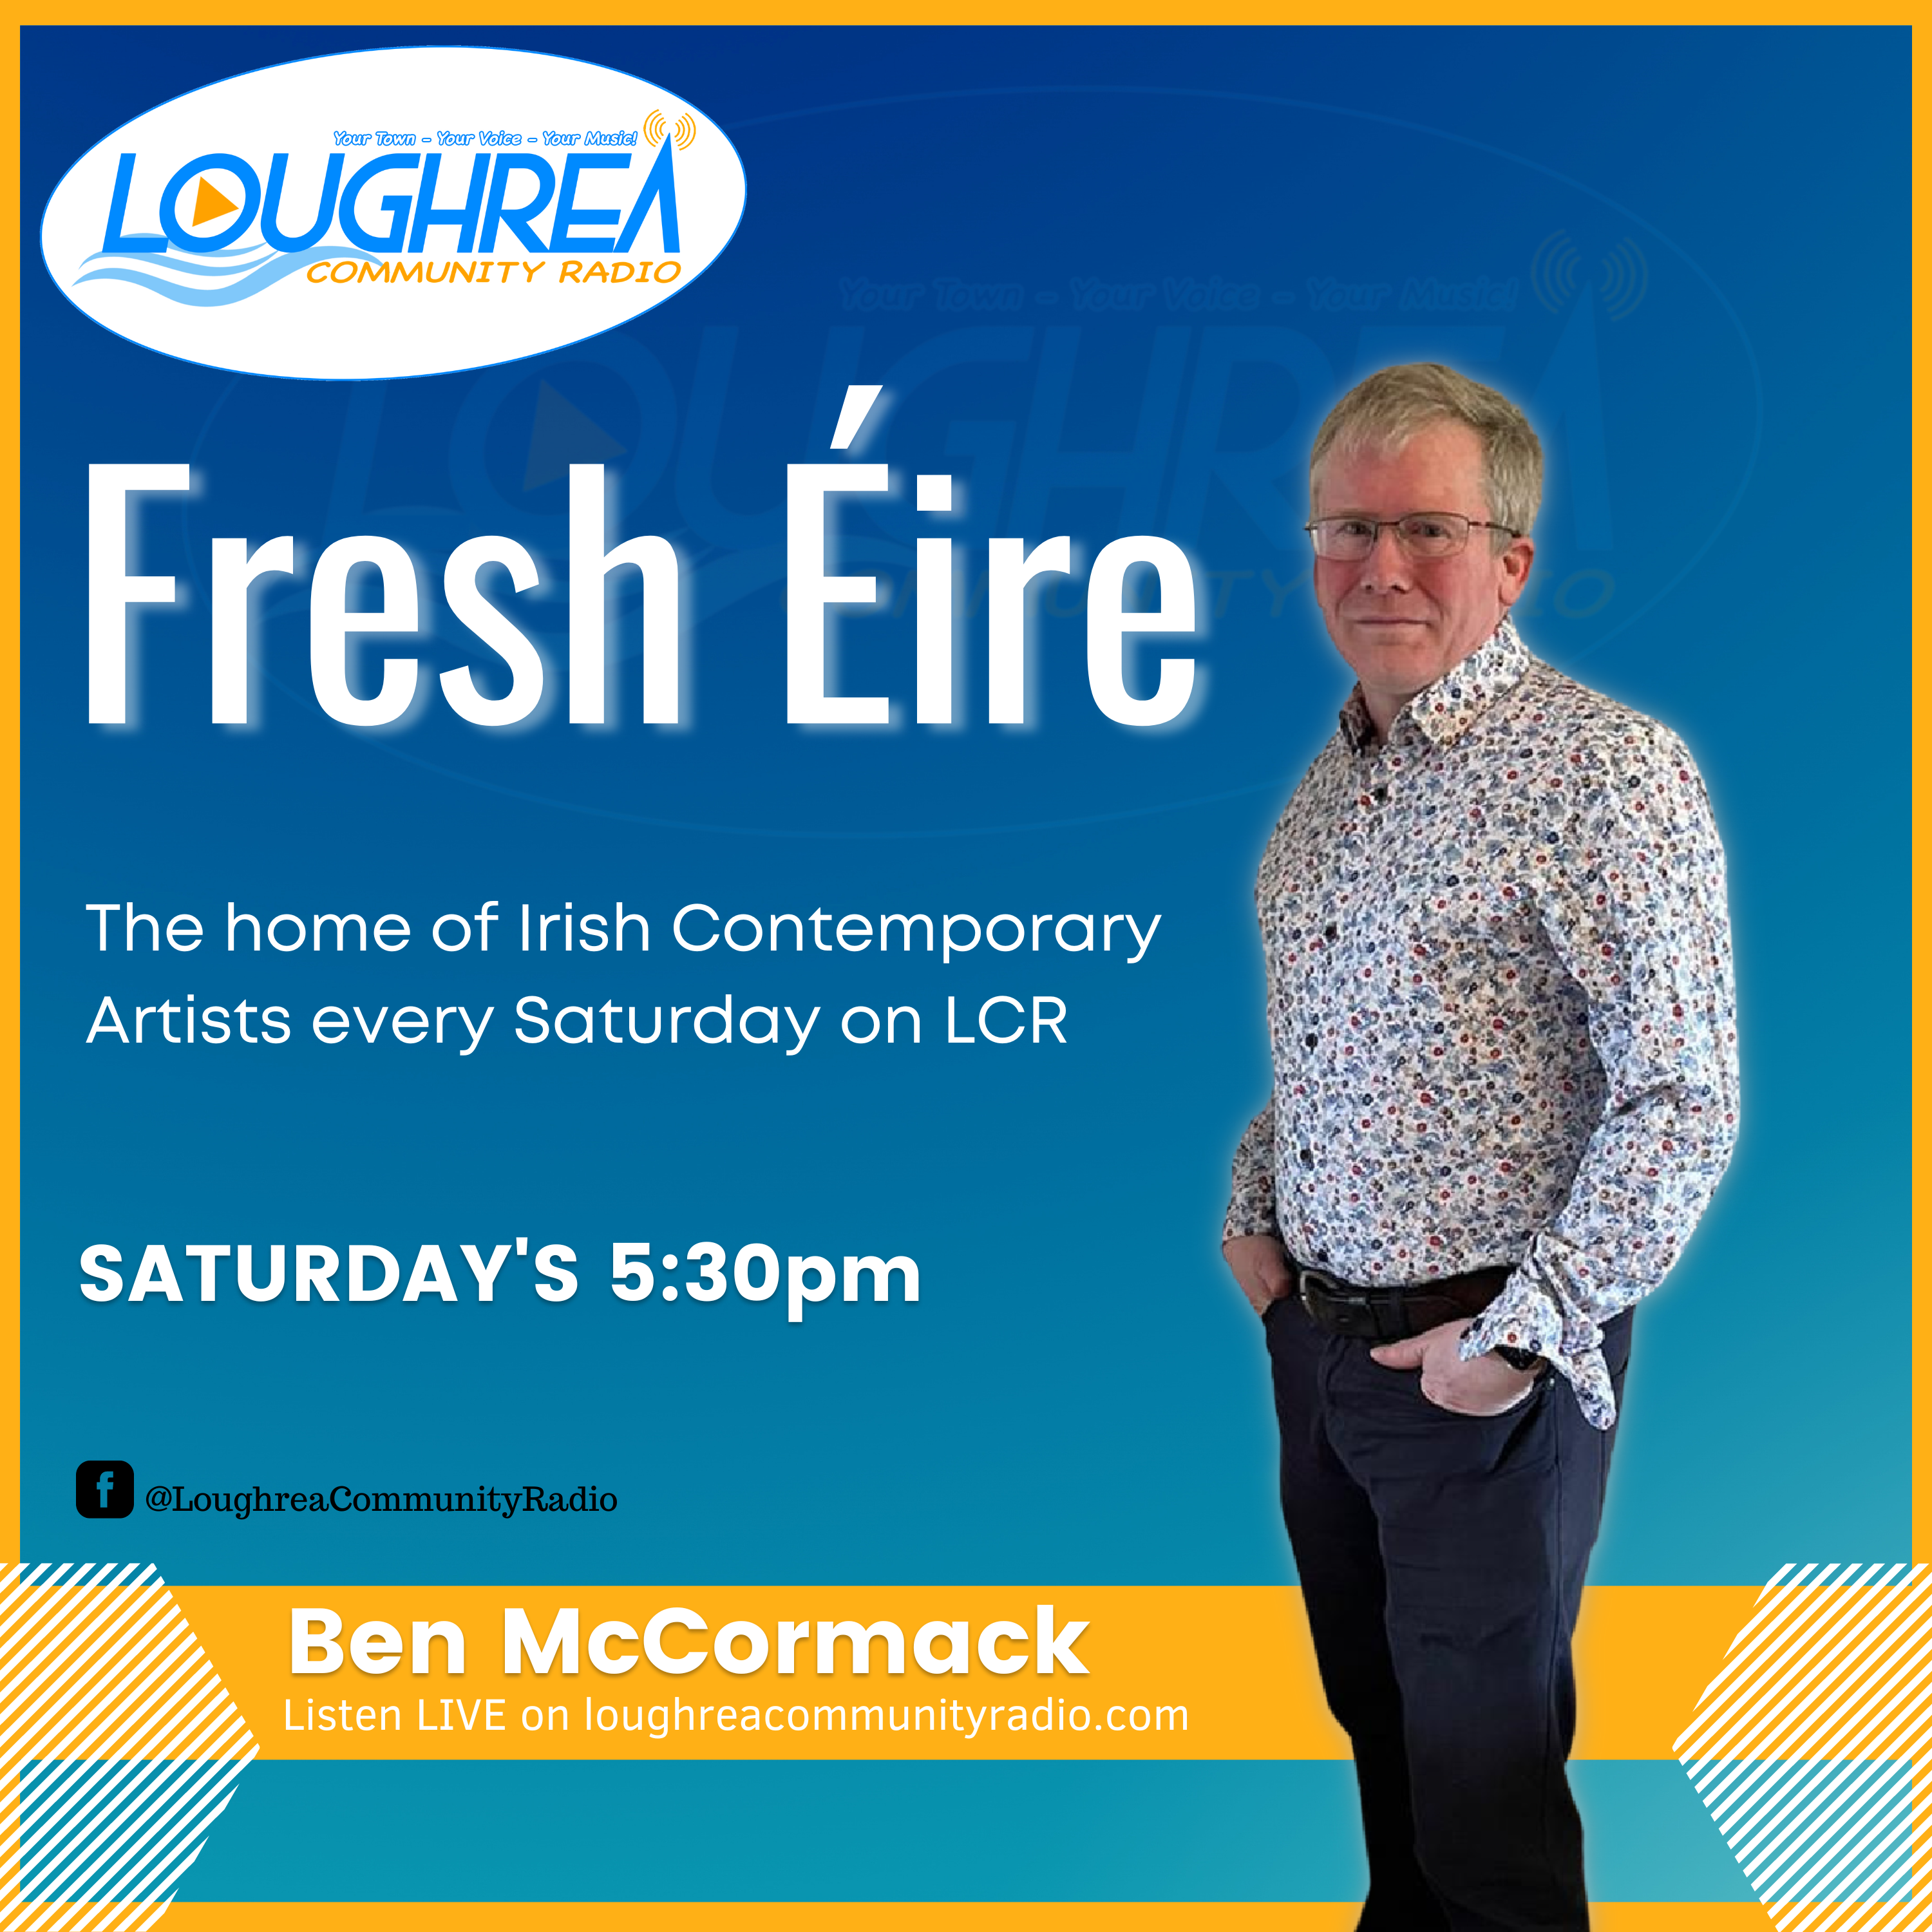 Loughrea Image for the episode